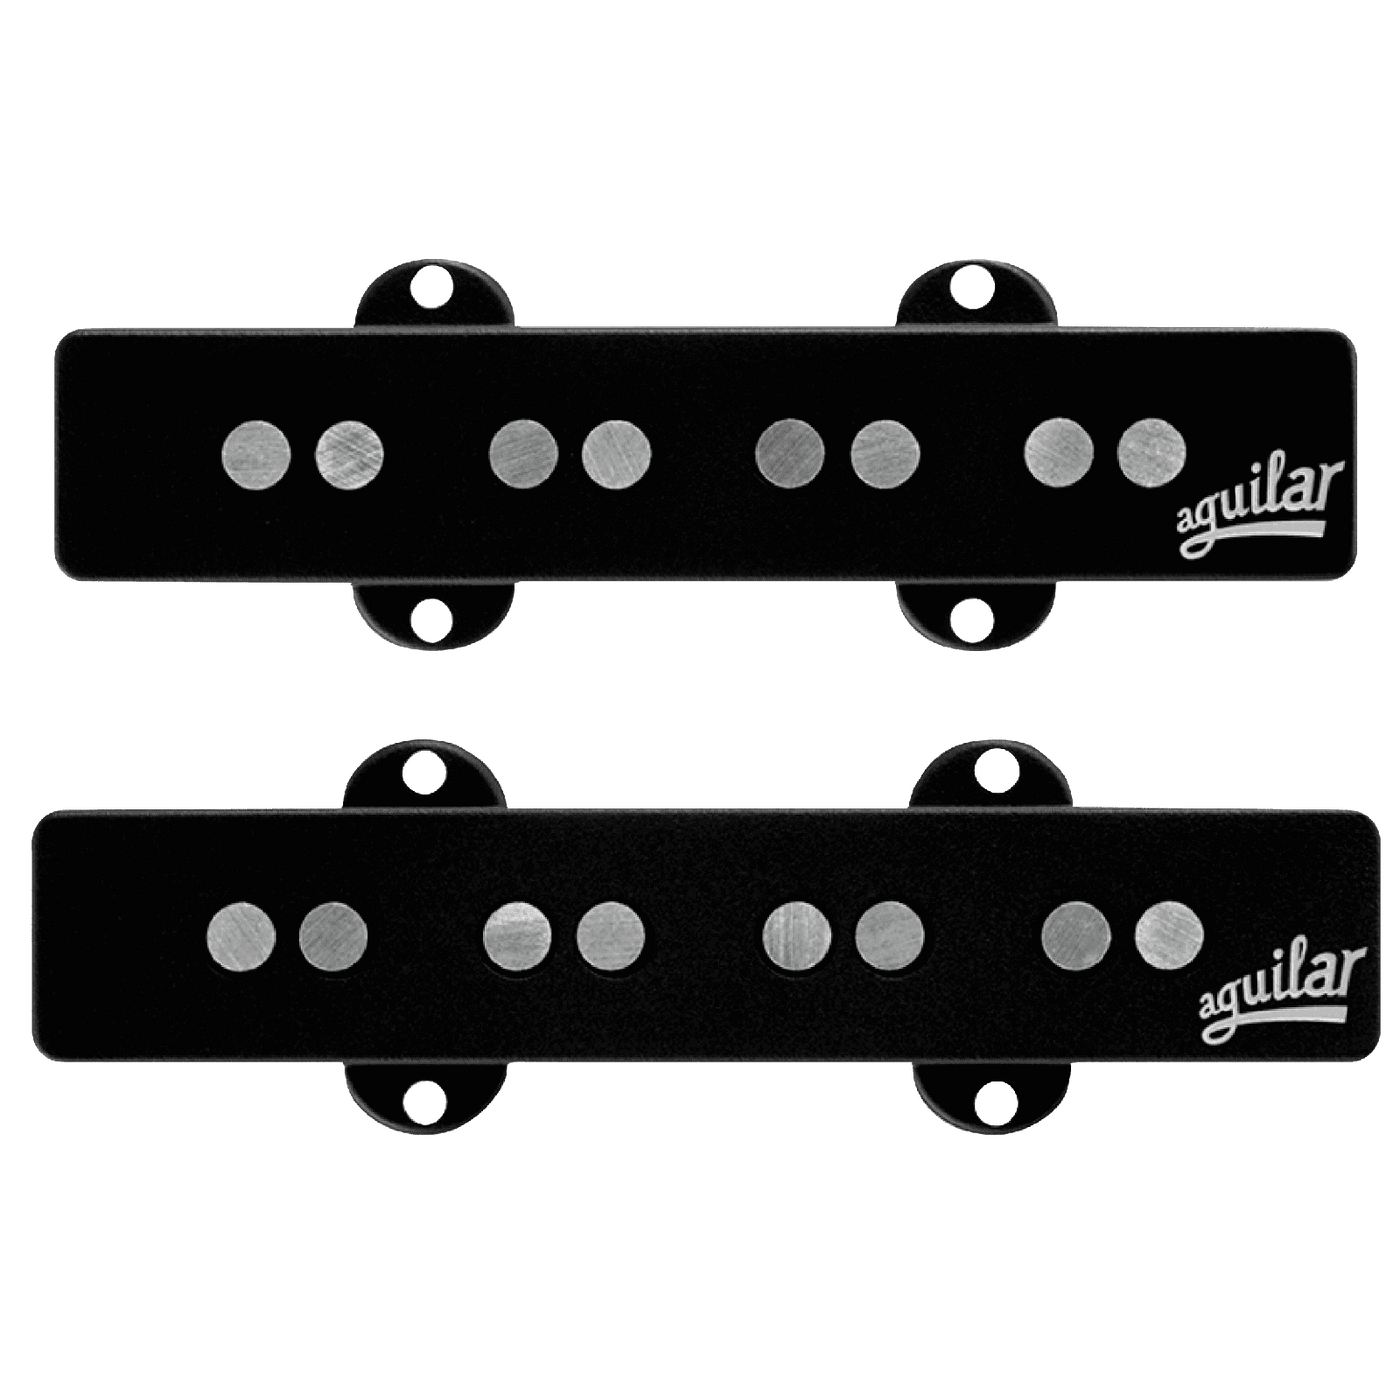 Aguilar AG 4J-70 - DescriptionIn order to capture the signature tone of the 70’s Jazz Bass pickup, we went through a unique prototyping process – sampling and deconstructing several pickups spanning the era to discover what makes them so special. Utilizin